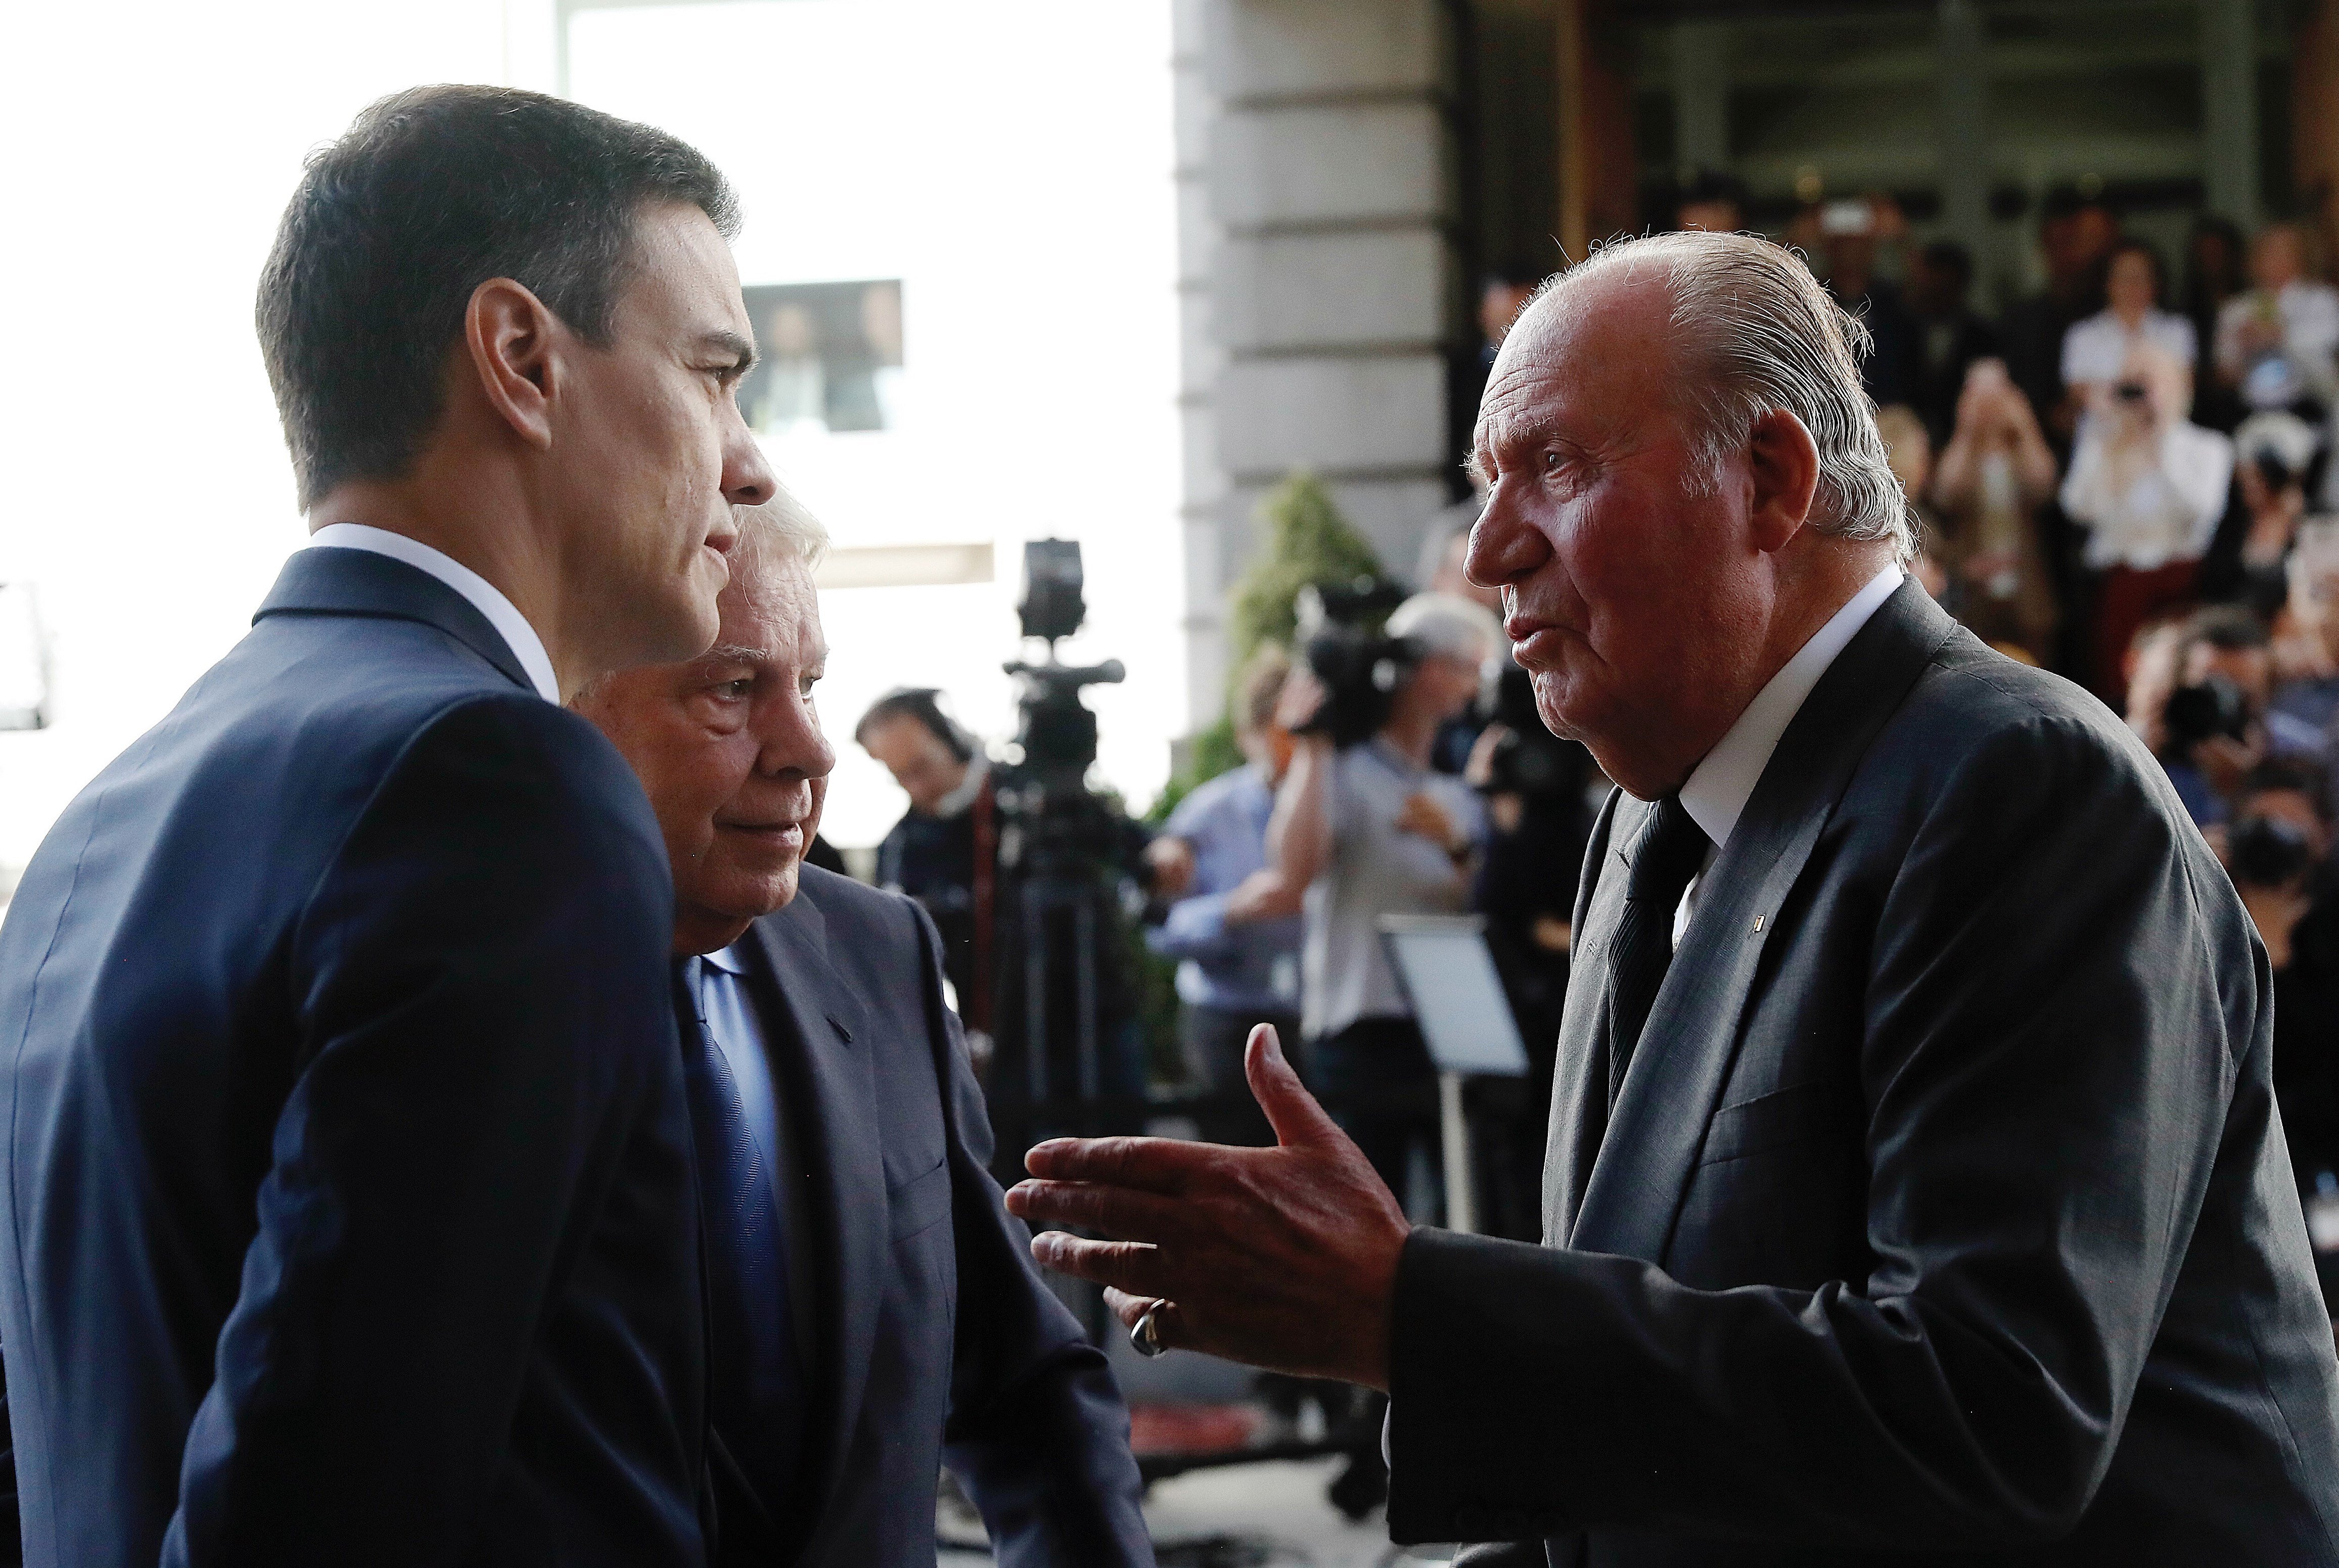 Sánchez sees Juan Carlos's letter as insufficient: "He owes Spaniards an explanation"